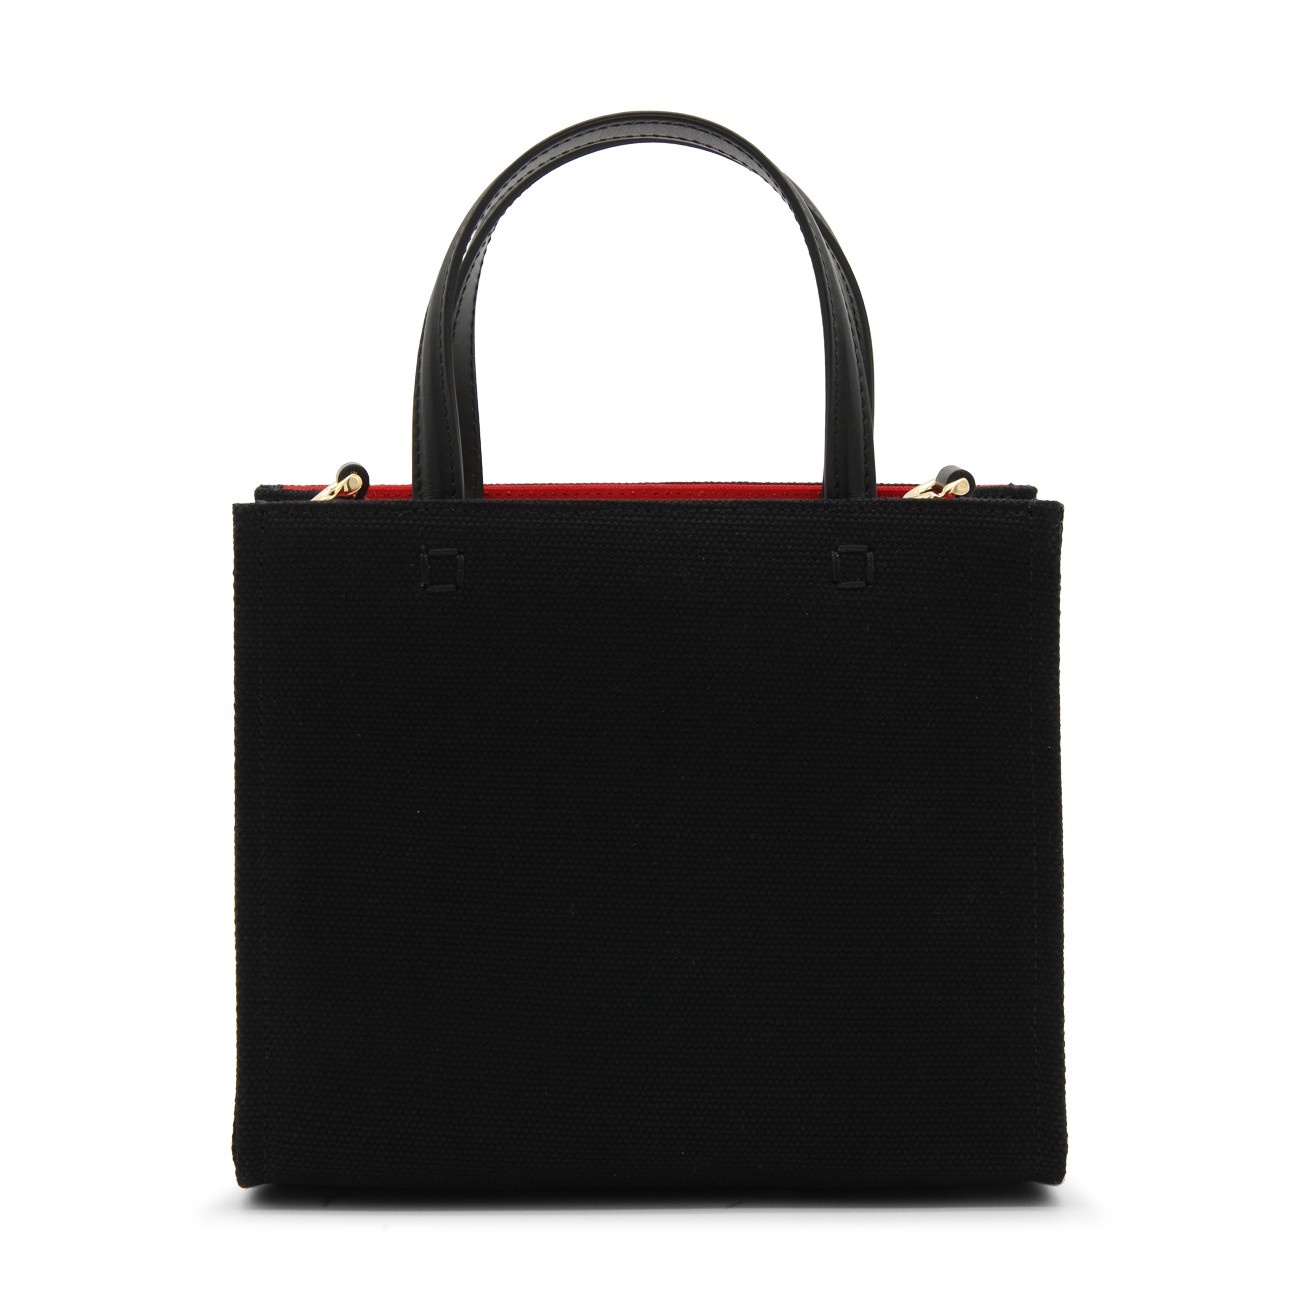 black, red and white canvas handle bag - 3